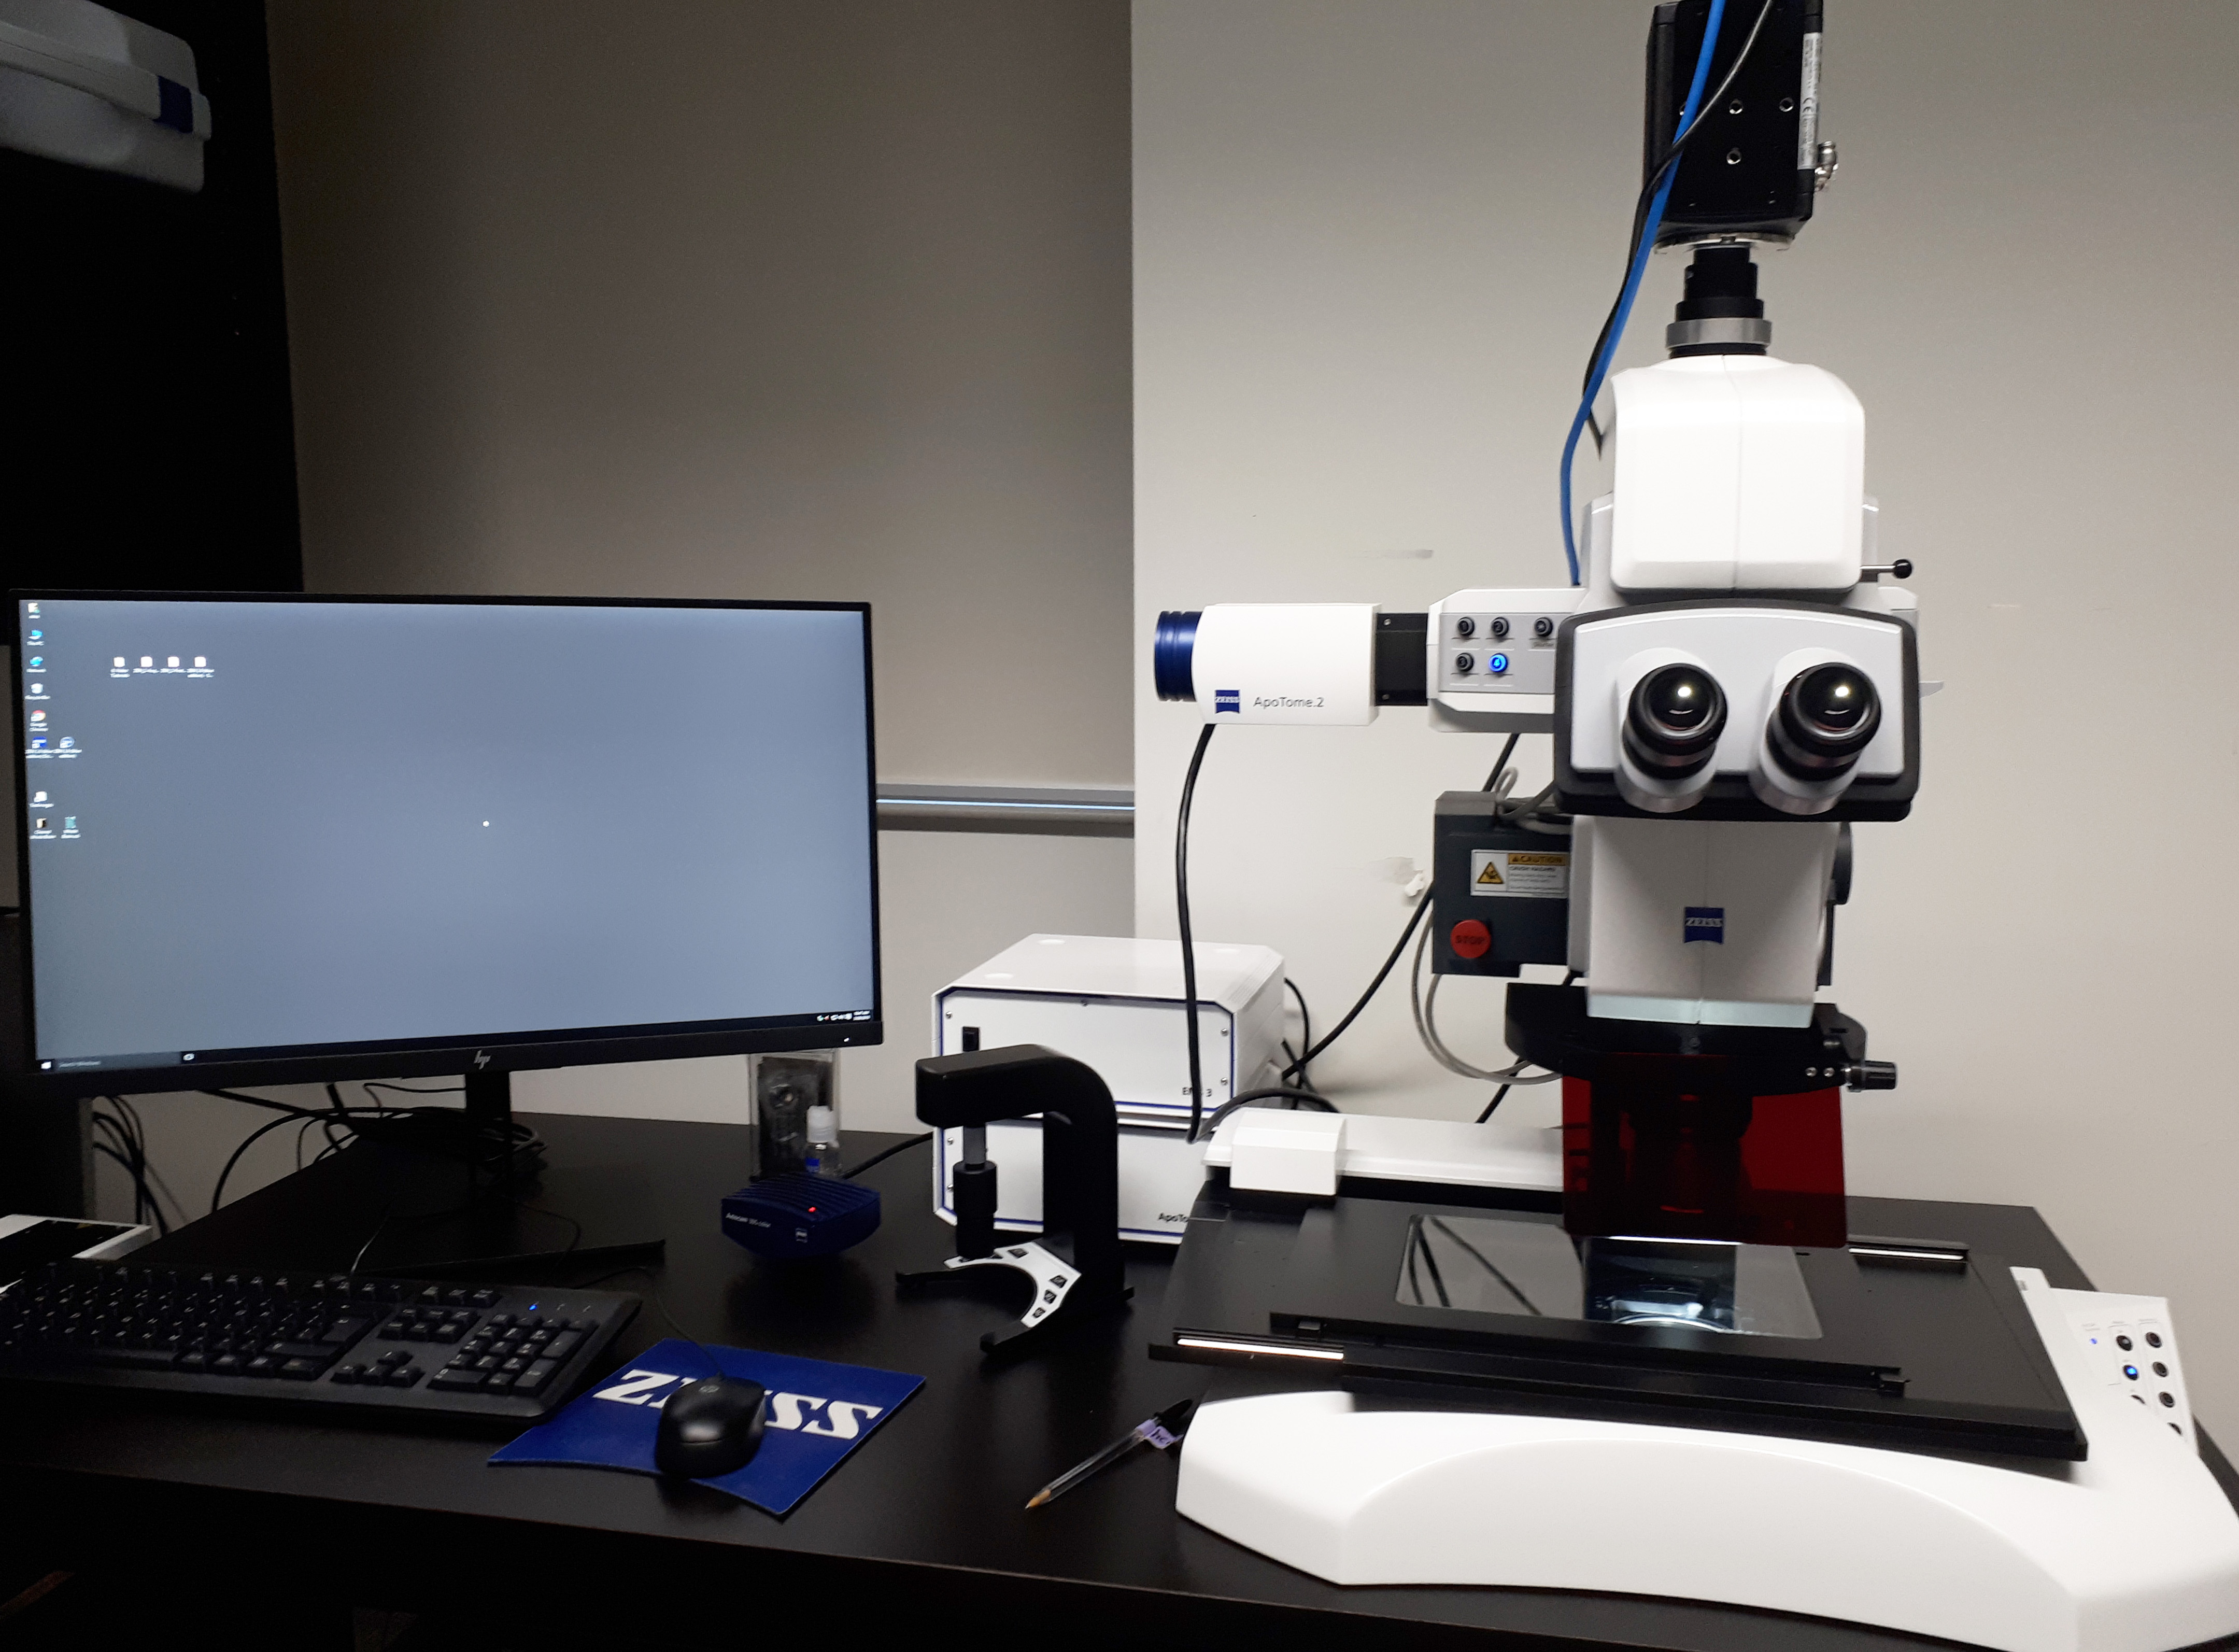 A picture of the Zeiss Axiozoom stereo microscope with accessory equipment and computer